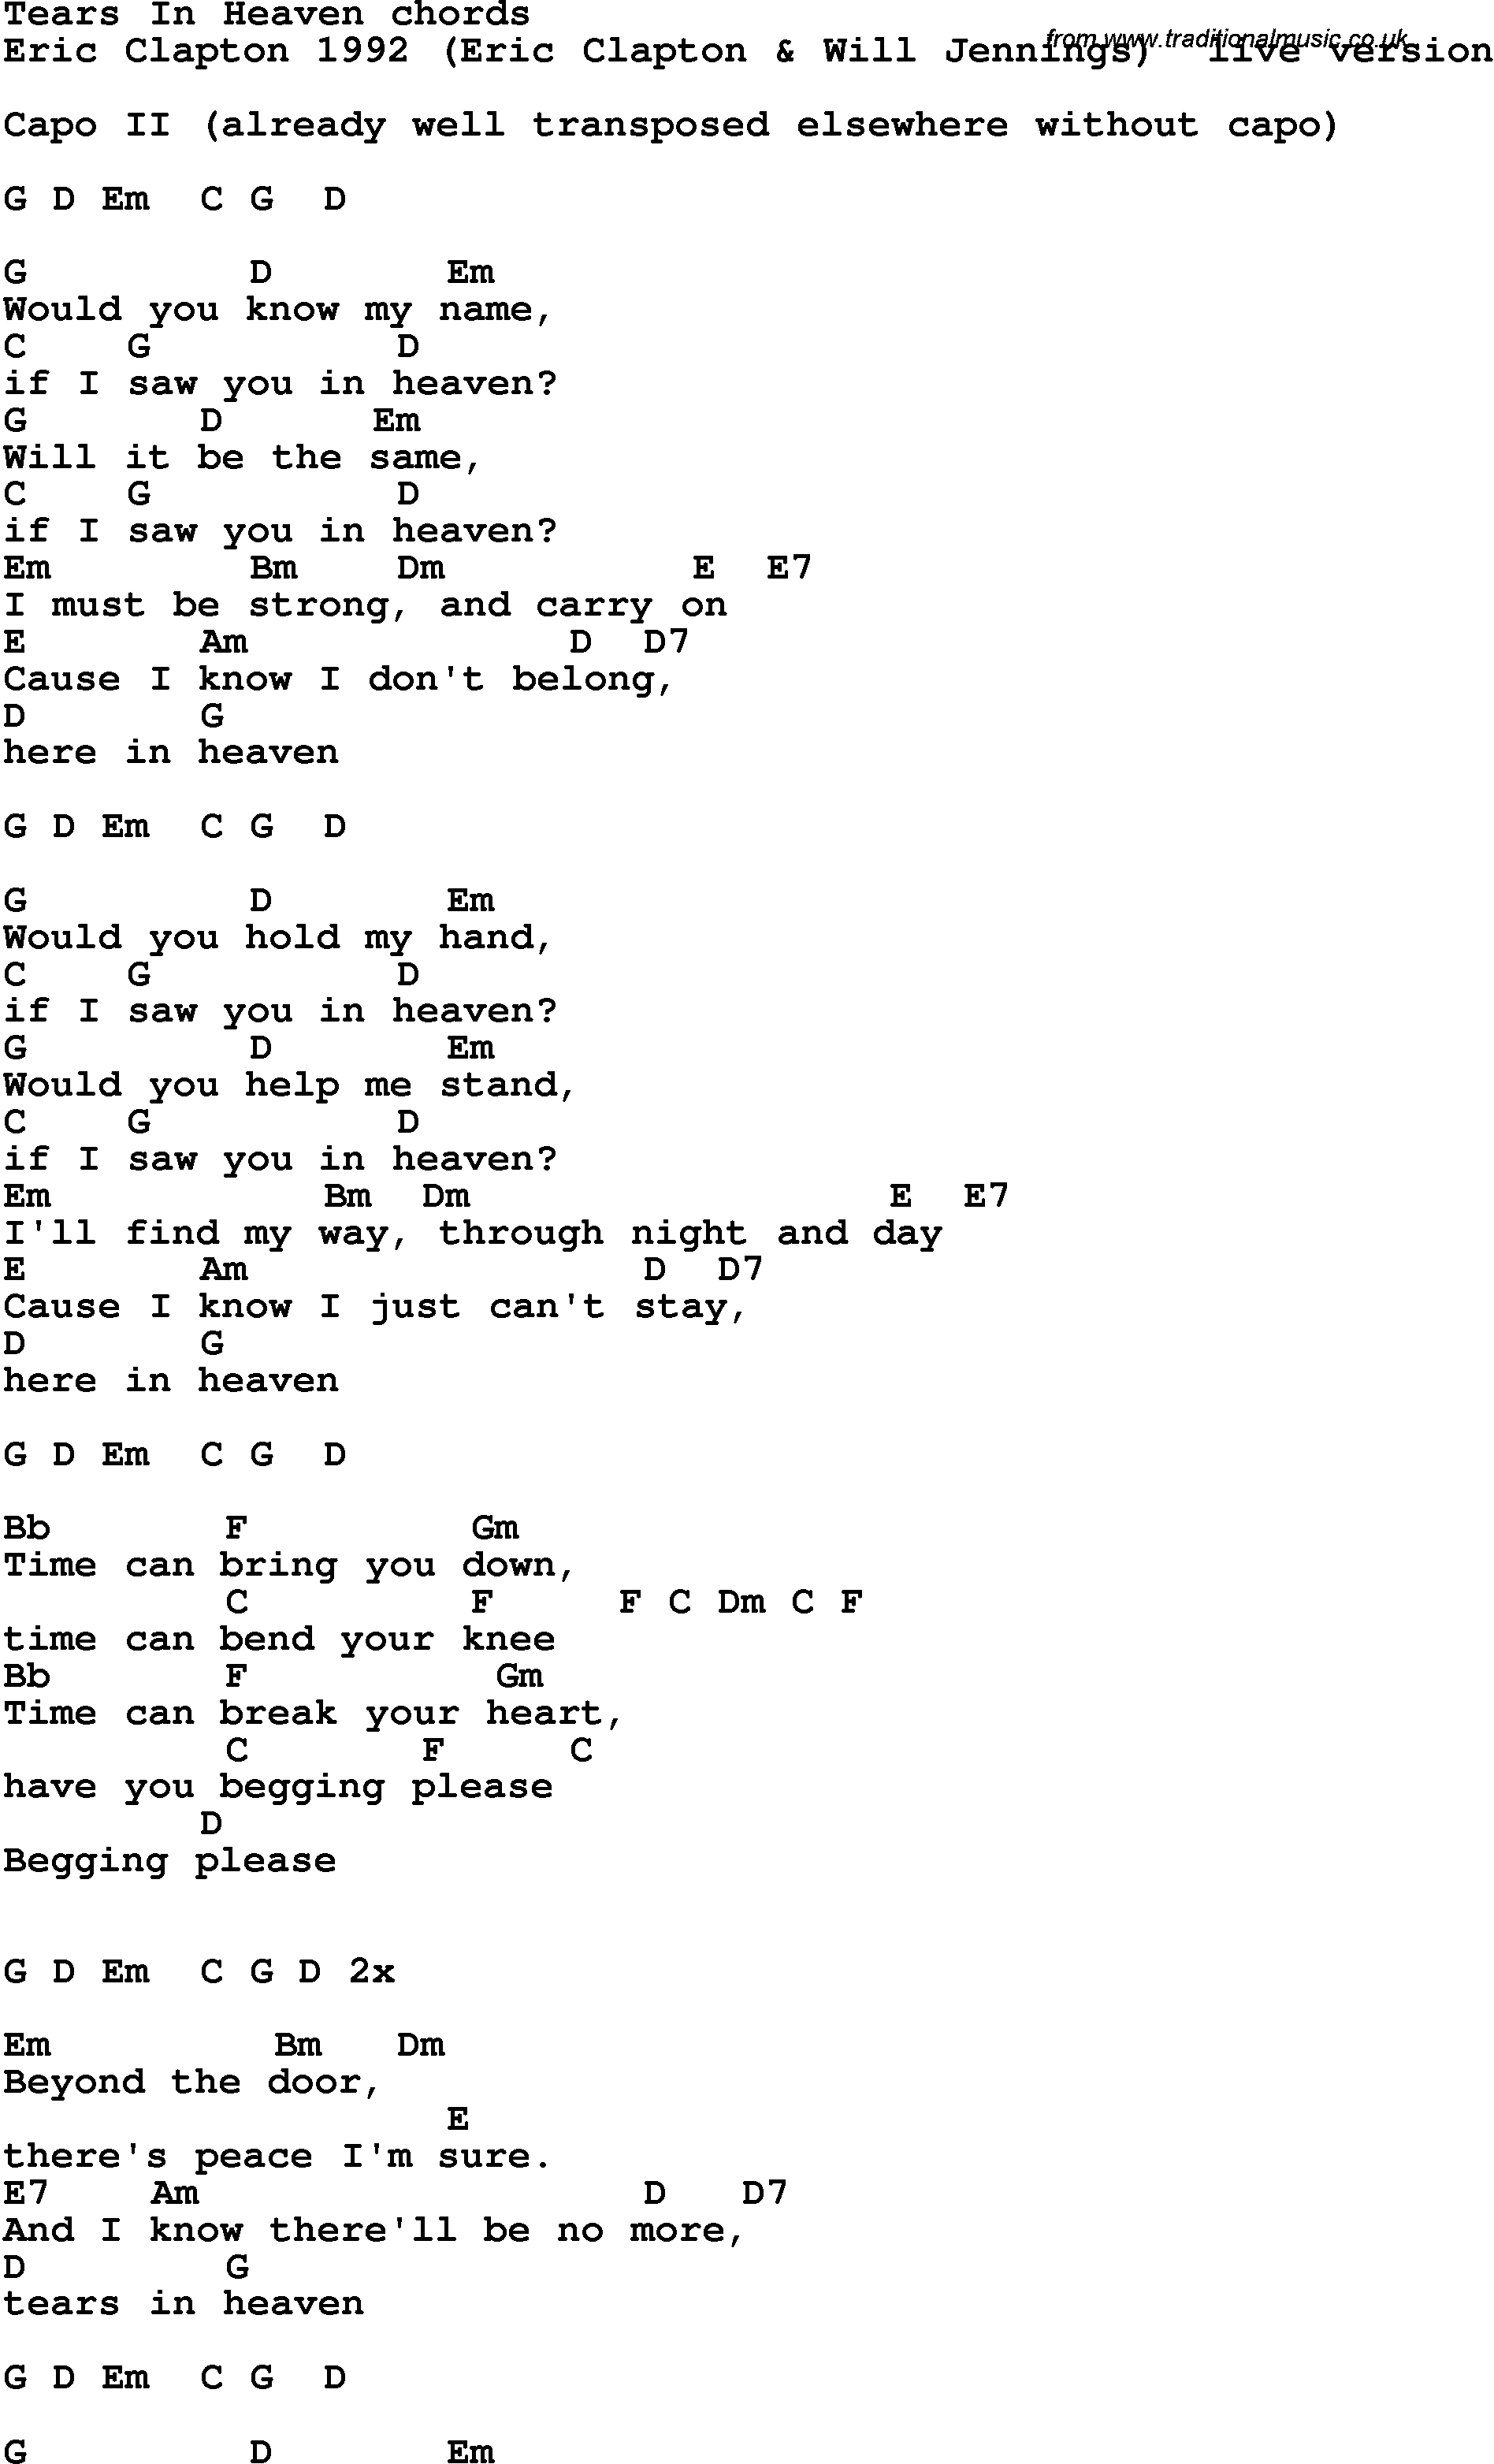 Tears In Heaven Chords Song Lyrics With Guitar Chords For Tears In Heaven Eric Clapton